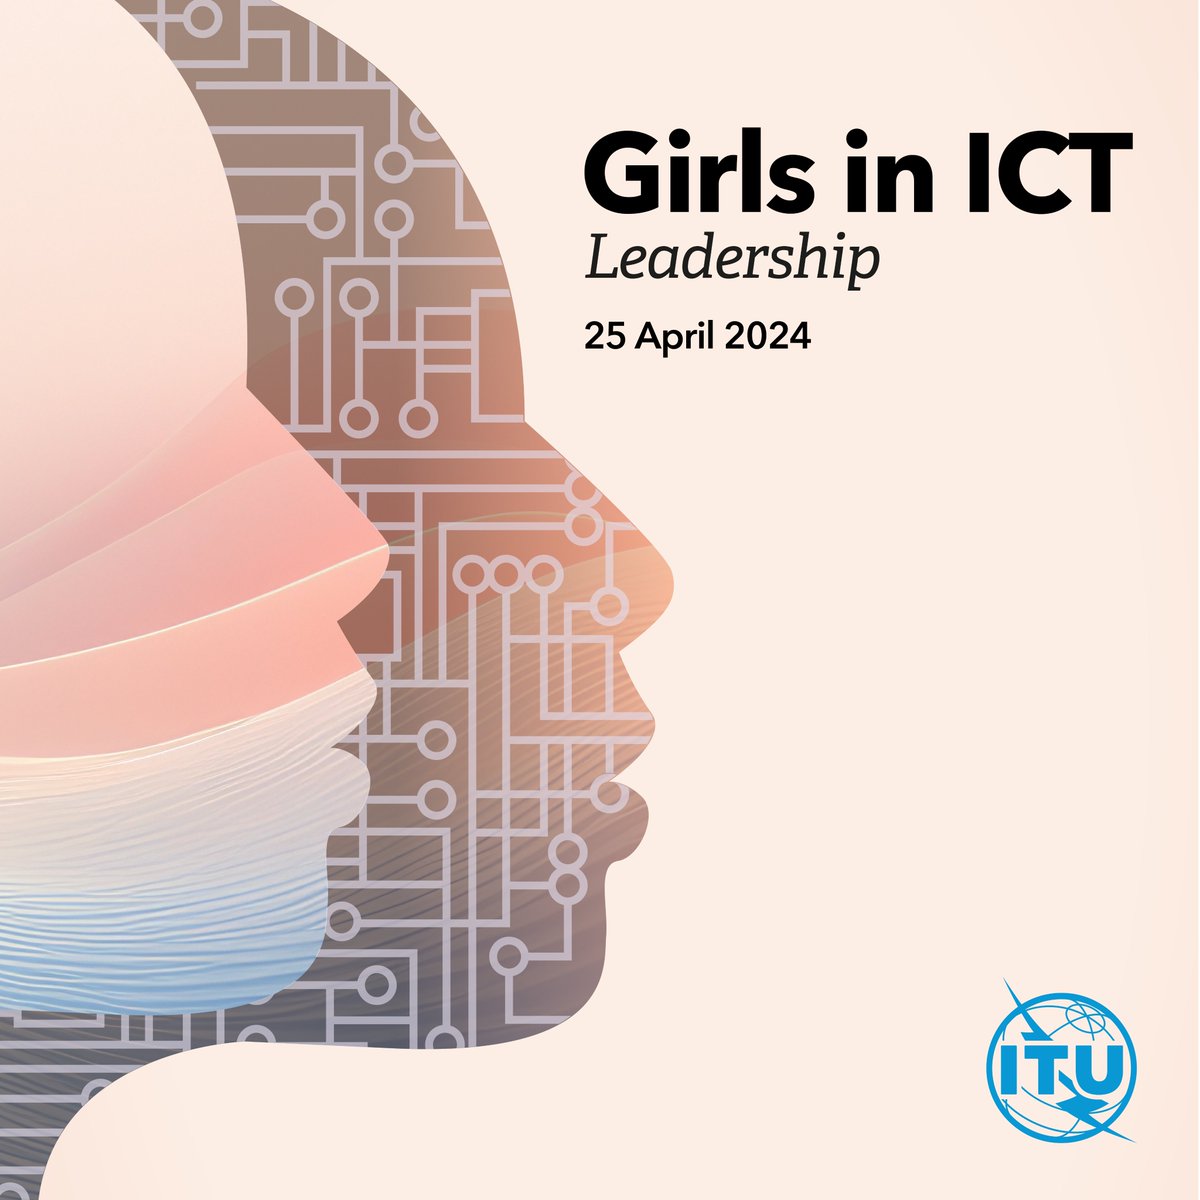 📣 Attention all aspiring young women eager to shape the tech landscape! Join @ITU on 25 Apr to commemorate #GirlsinICT Day, championing #leadership &delving into thrilling career avenues in #ICT! Explore events or ignite one in your community 👩‍💻 itu.int/girlsinict